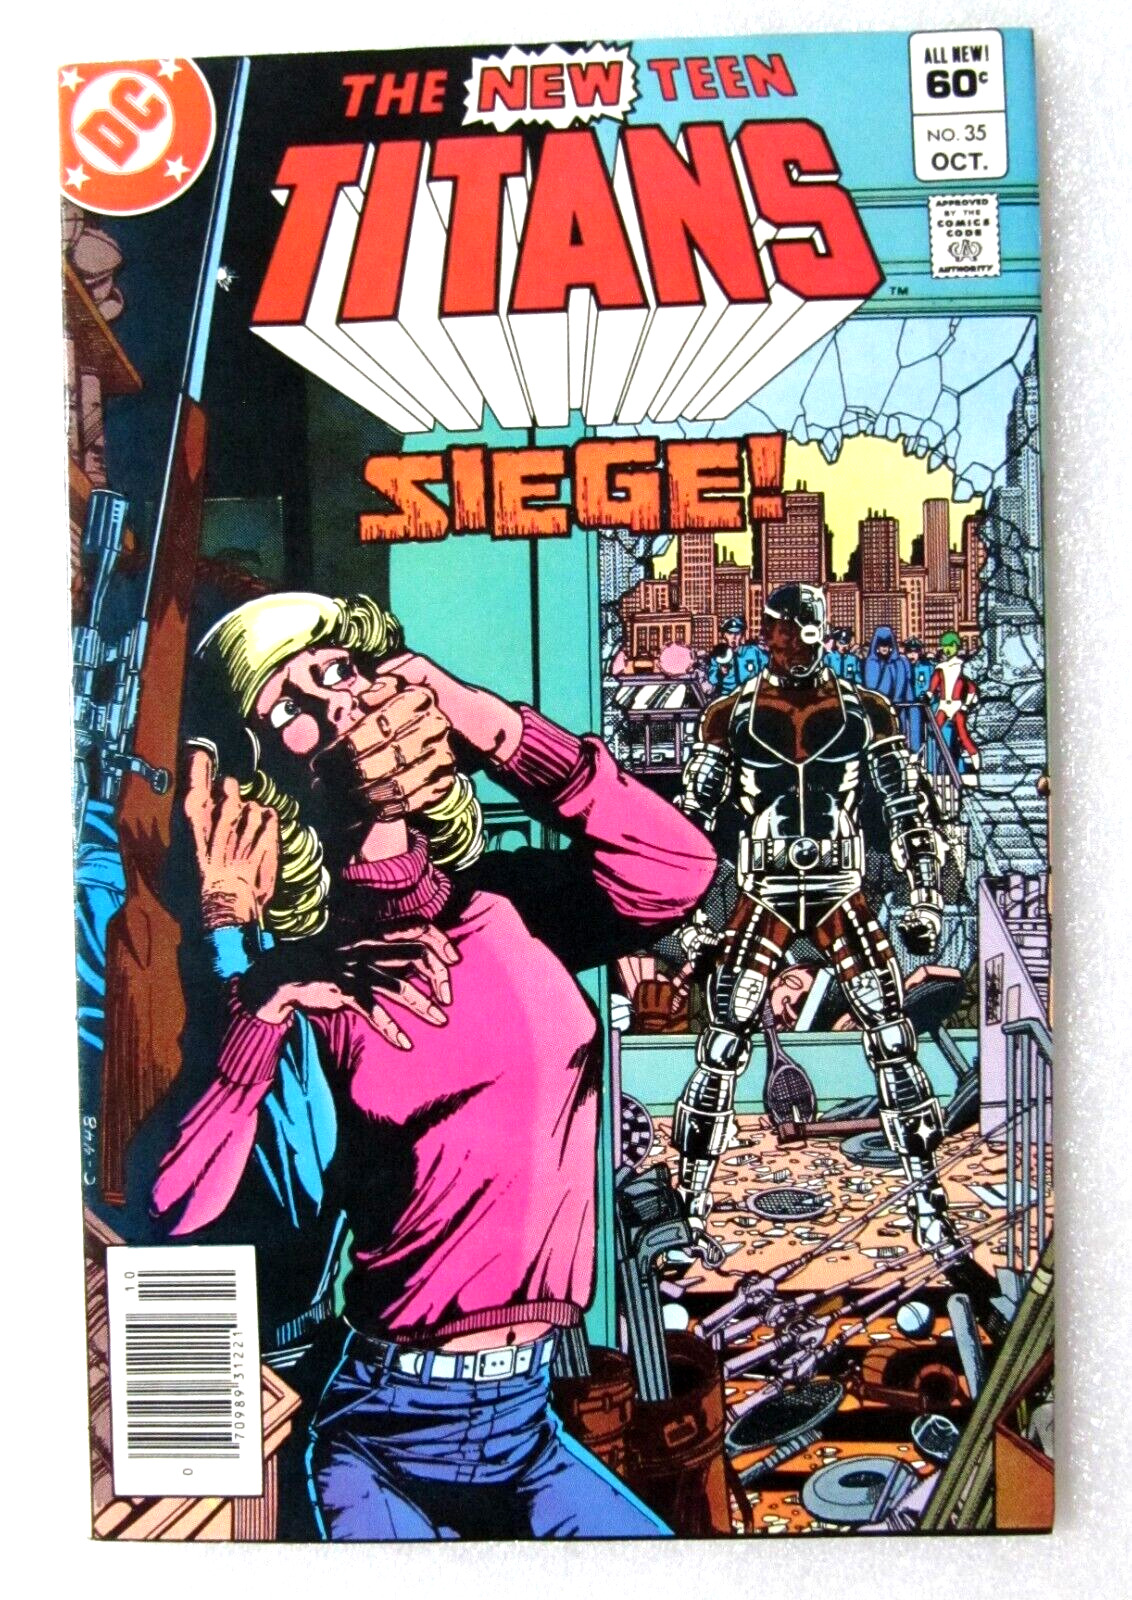 THE NEW TEEN TITANS #35 - 1983 BRONZE AGE DC COMICS - WOLFMAN, PEREZ COVER